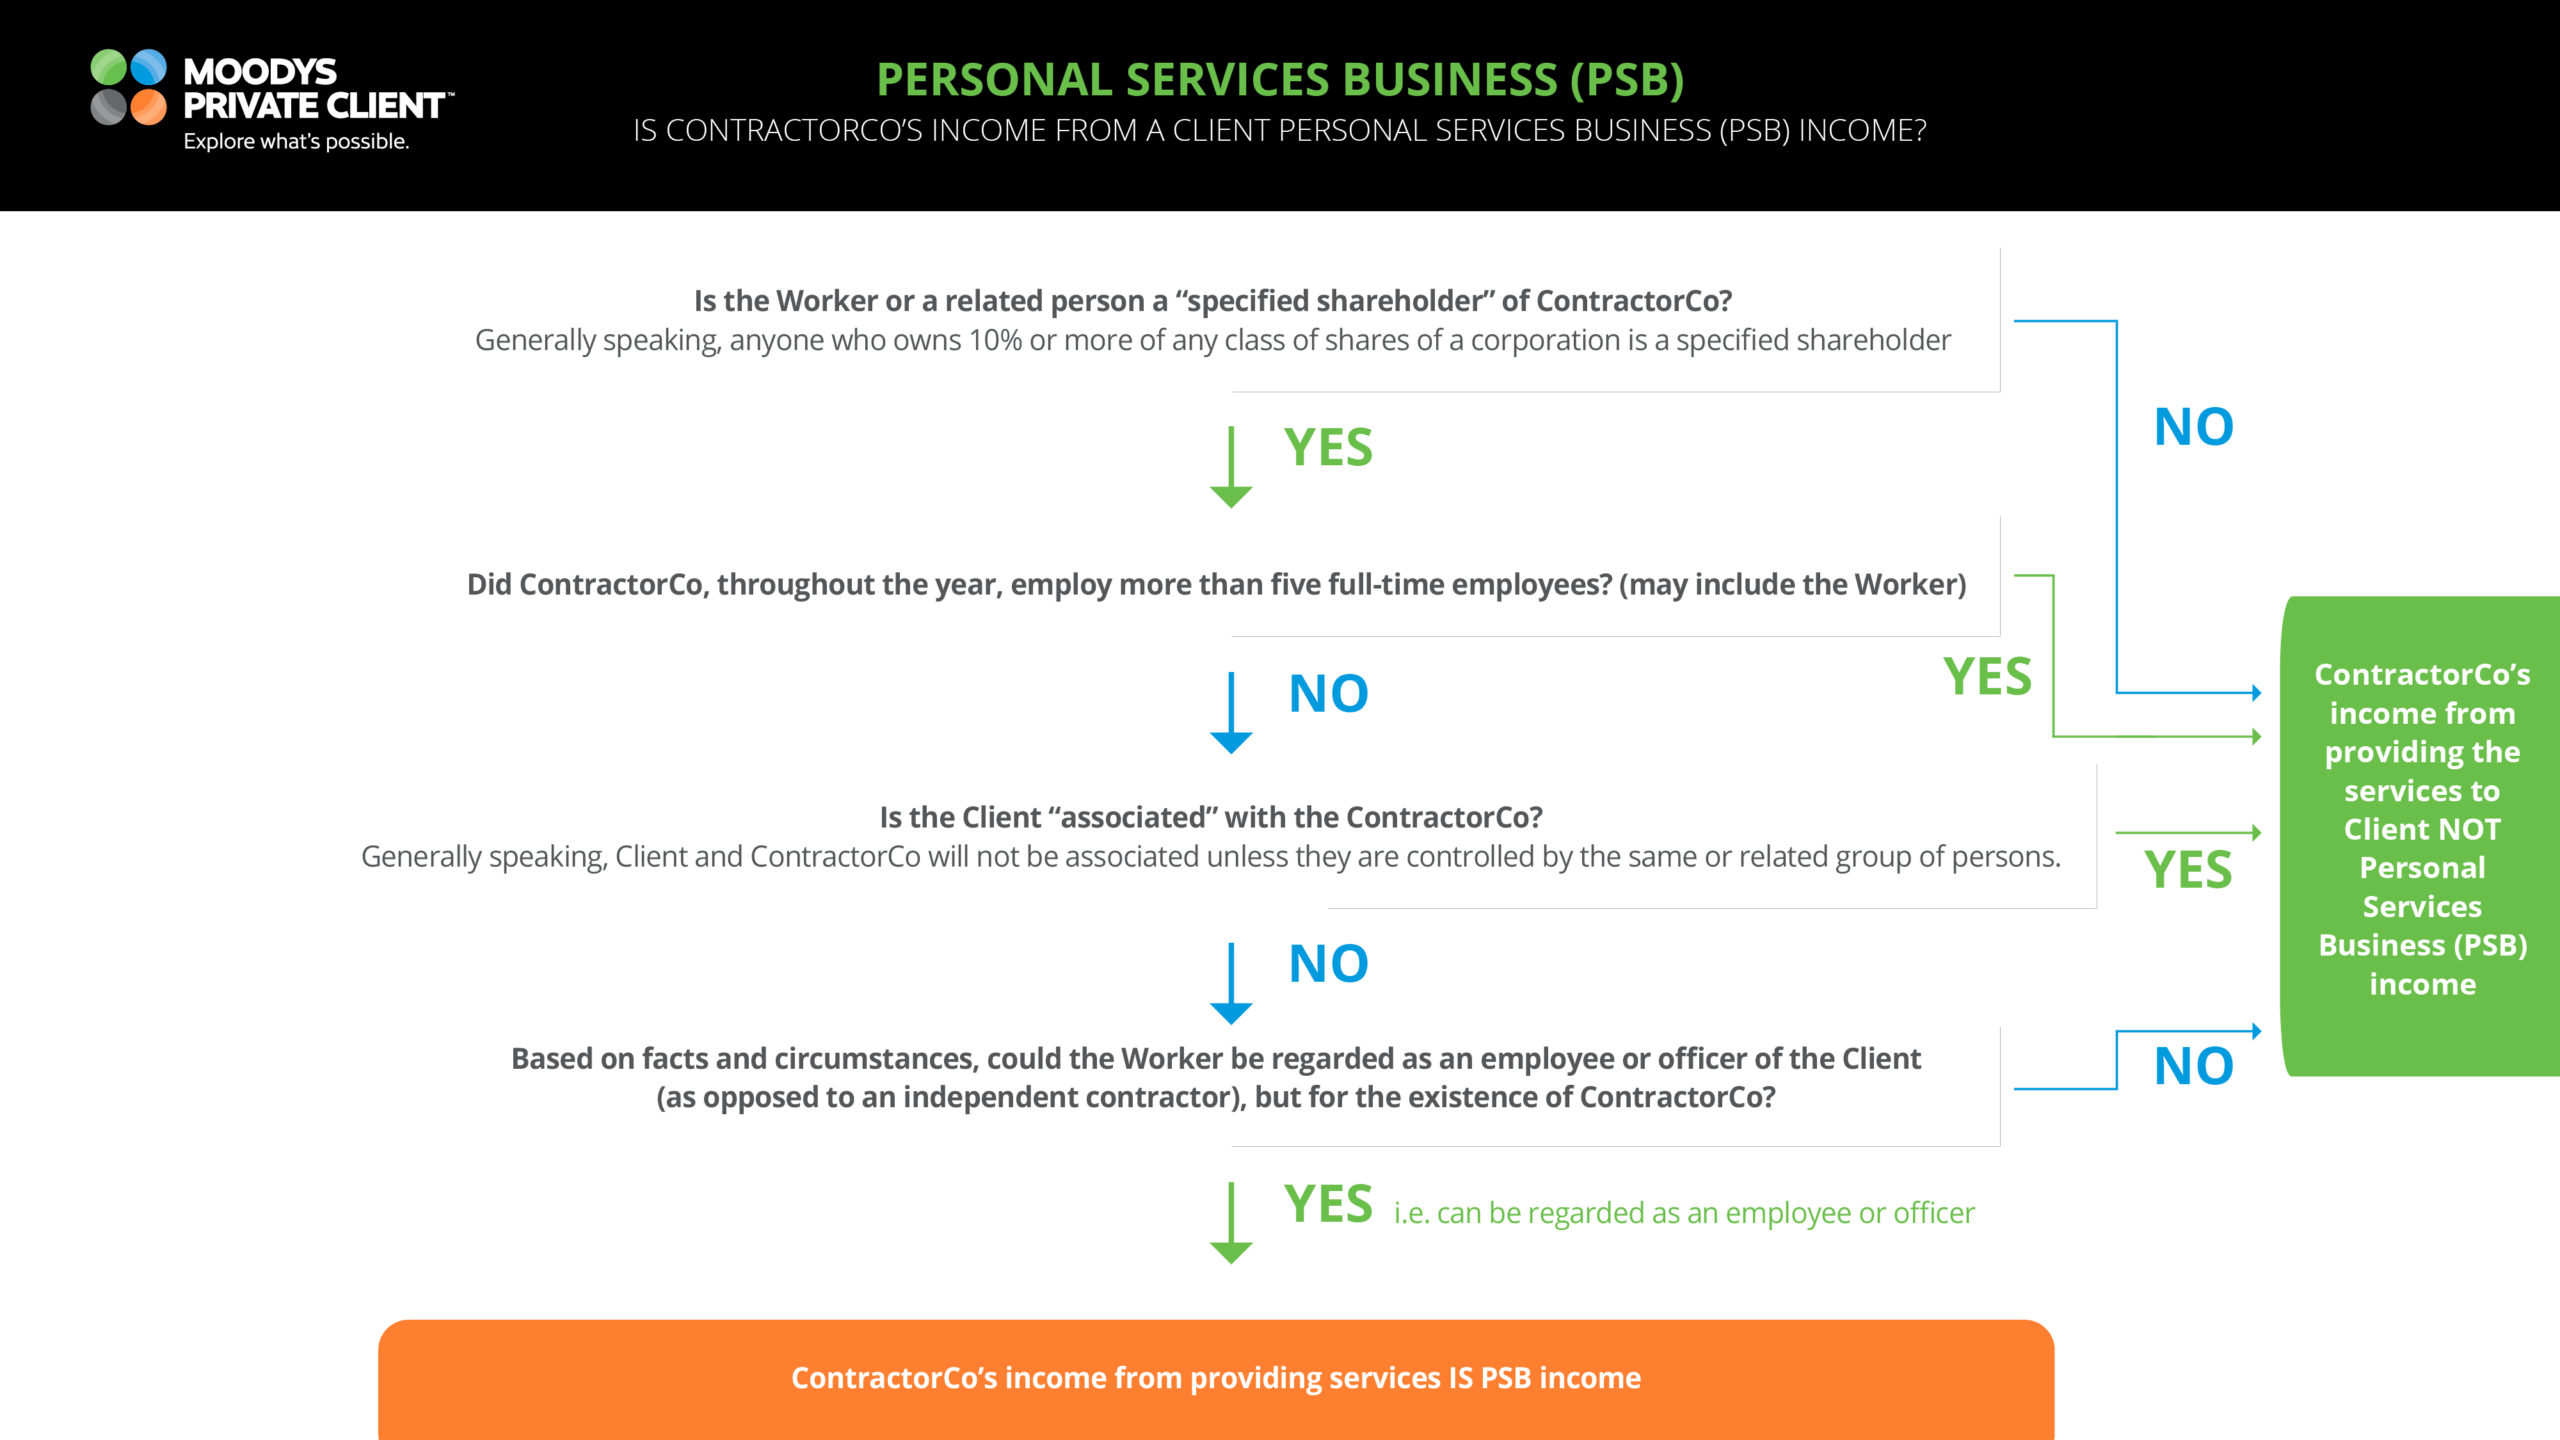 MPC_Personal Services Business Flowchart_220817